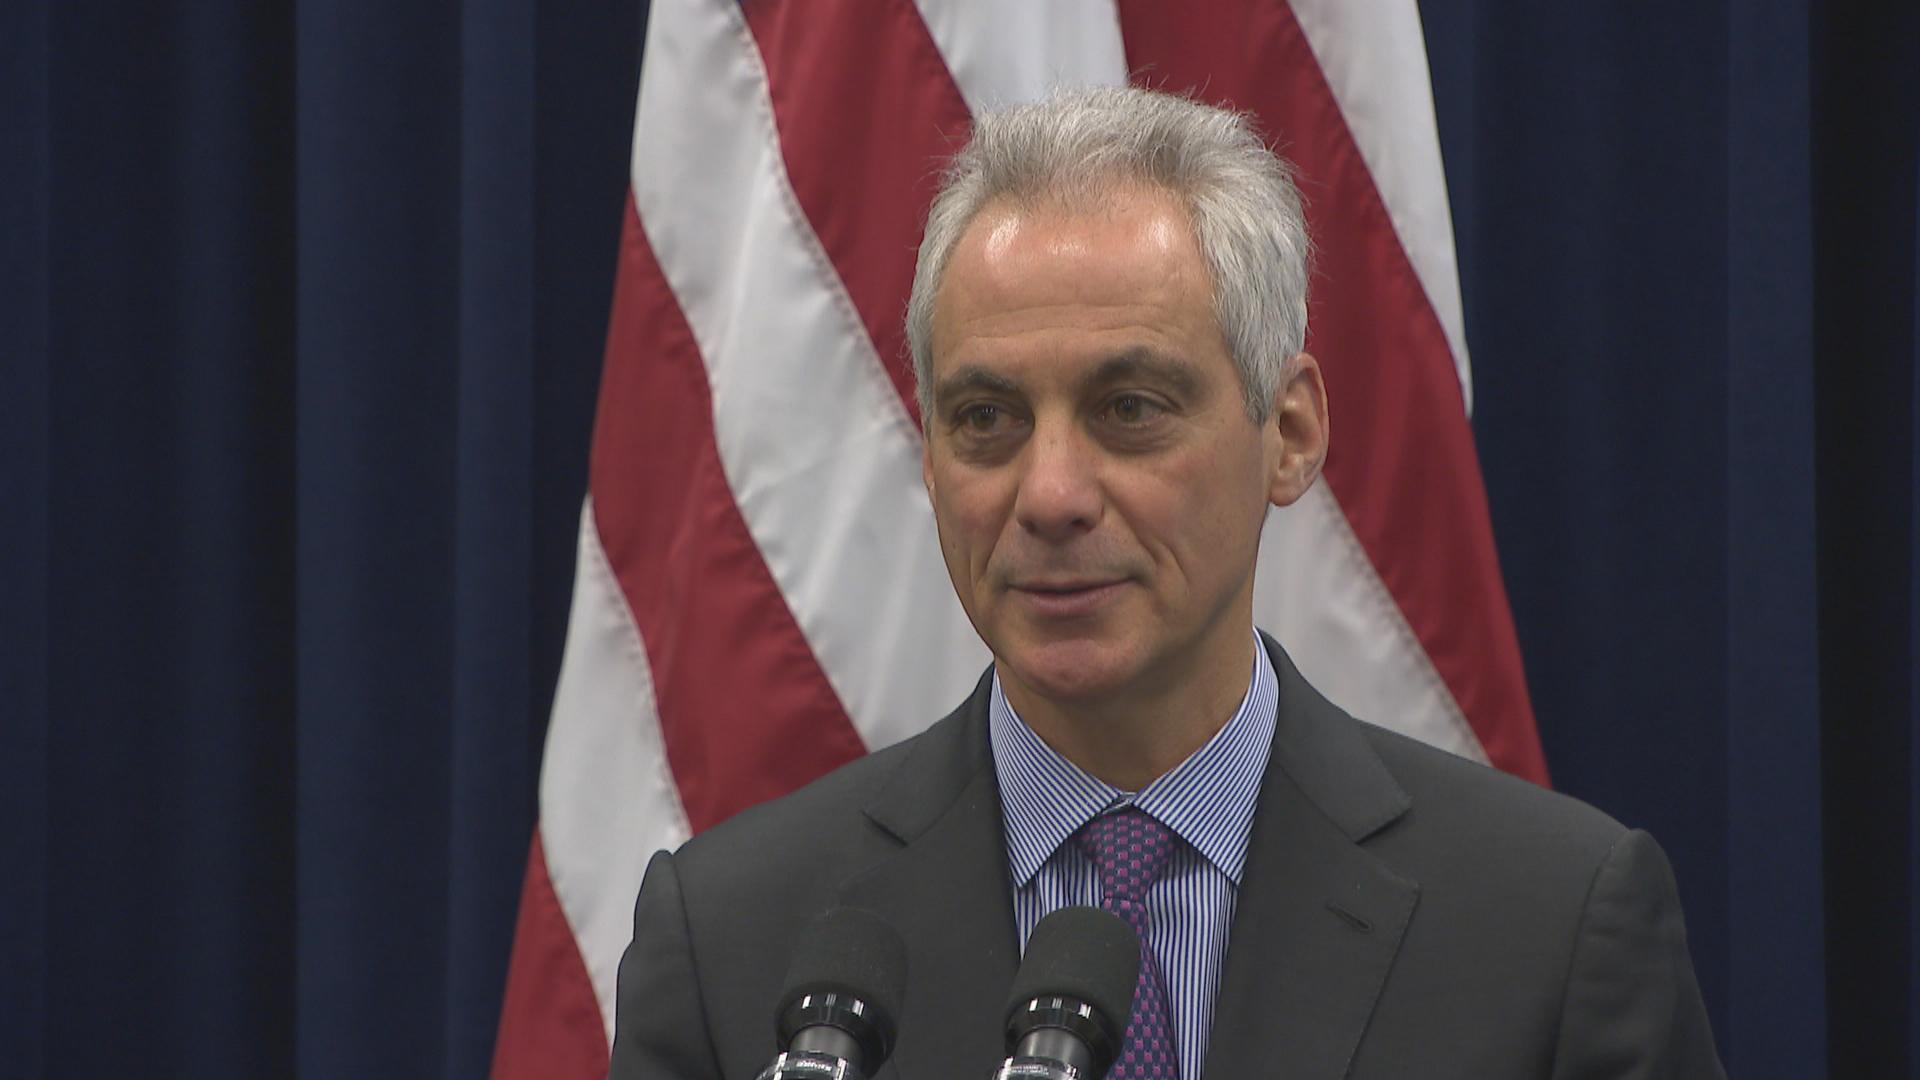 Mayor Rahm Emanuel speaks to the press following City Council’s approval of two controversial developments on Wednesday, March 13, 2019. (Chicago Tonight)